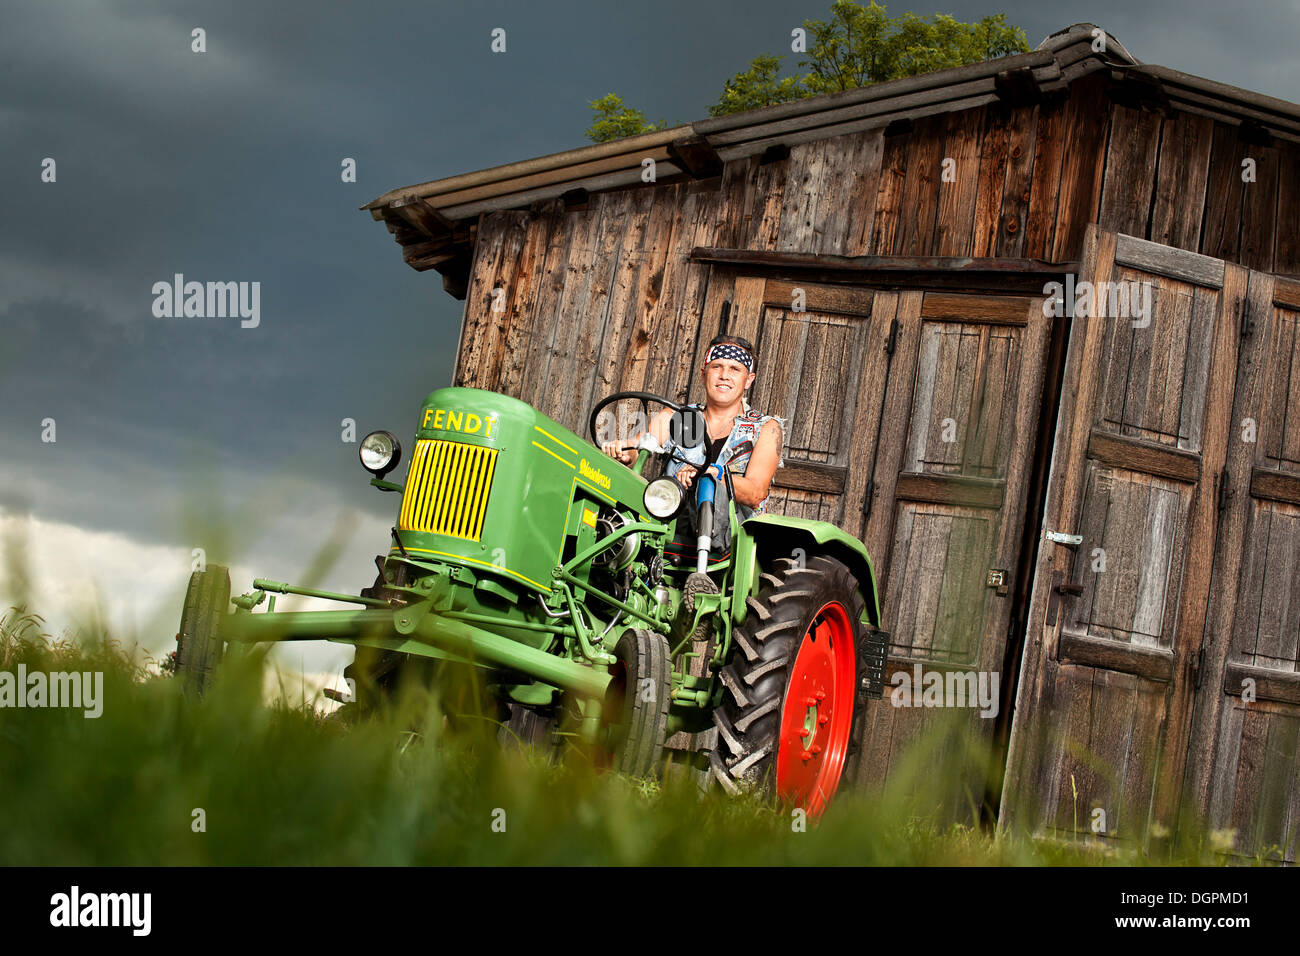 Man with a prosthetic leg driving a vintage tractor Stock Photo